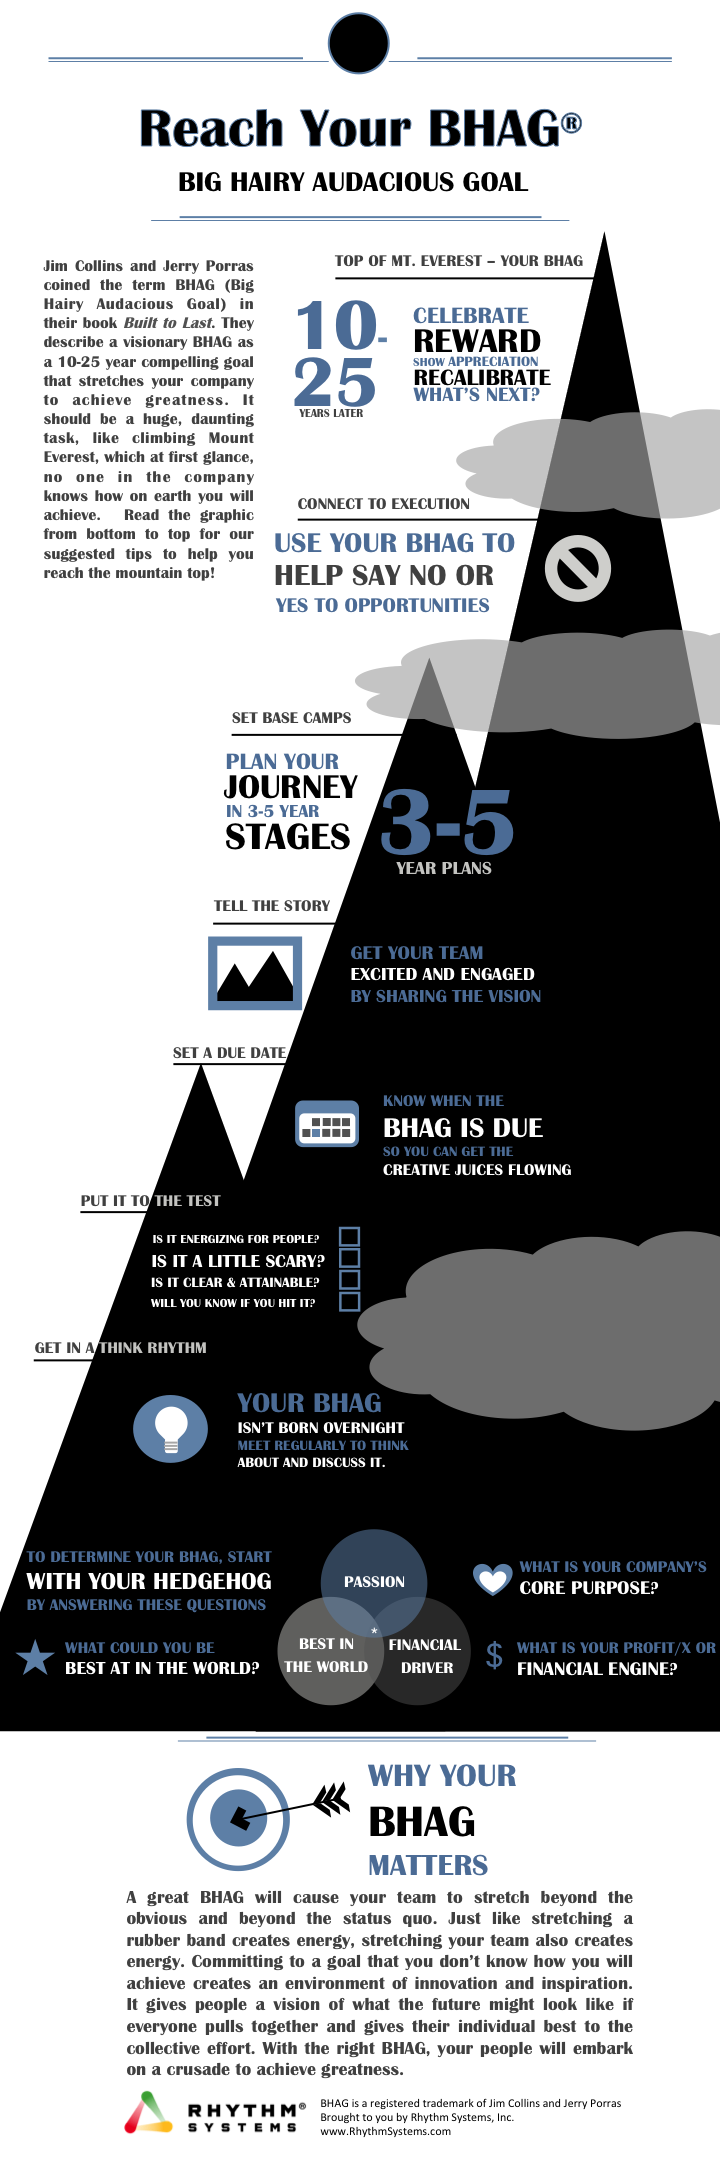 Reach-Your-BHAG-infographic